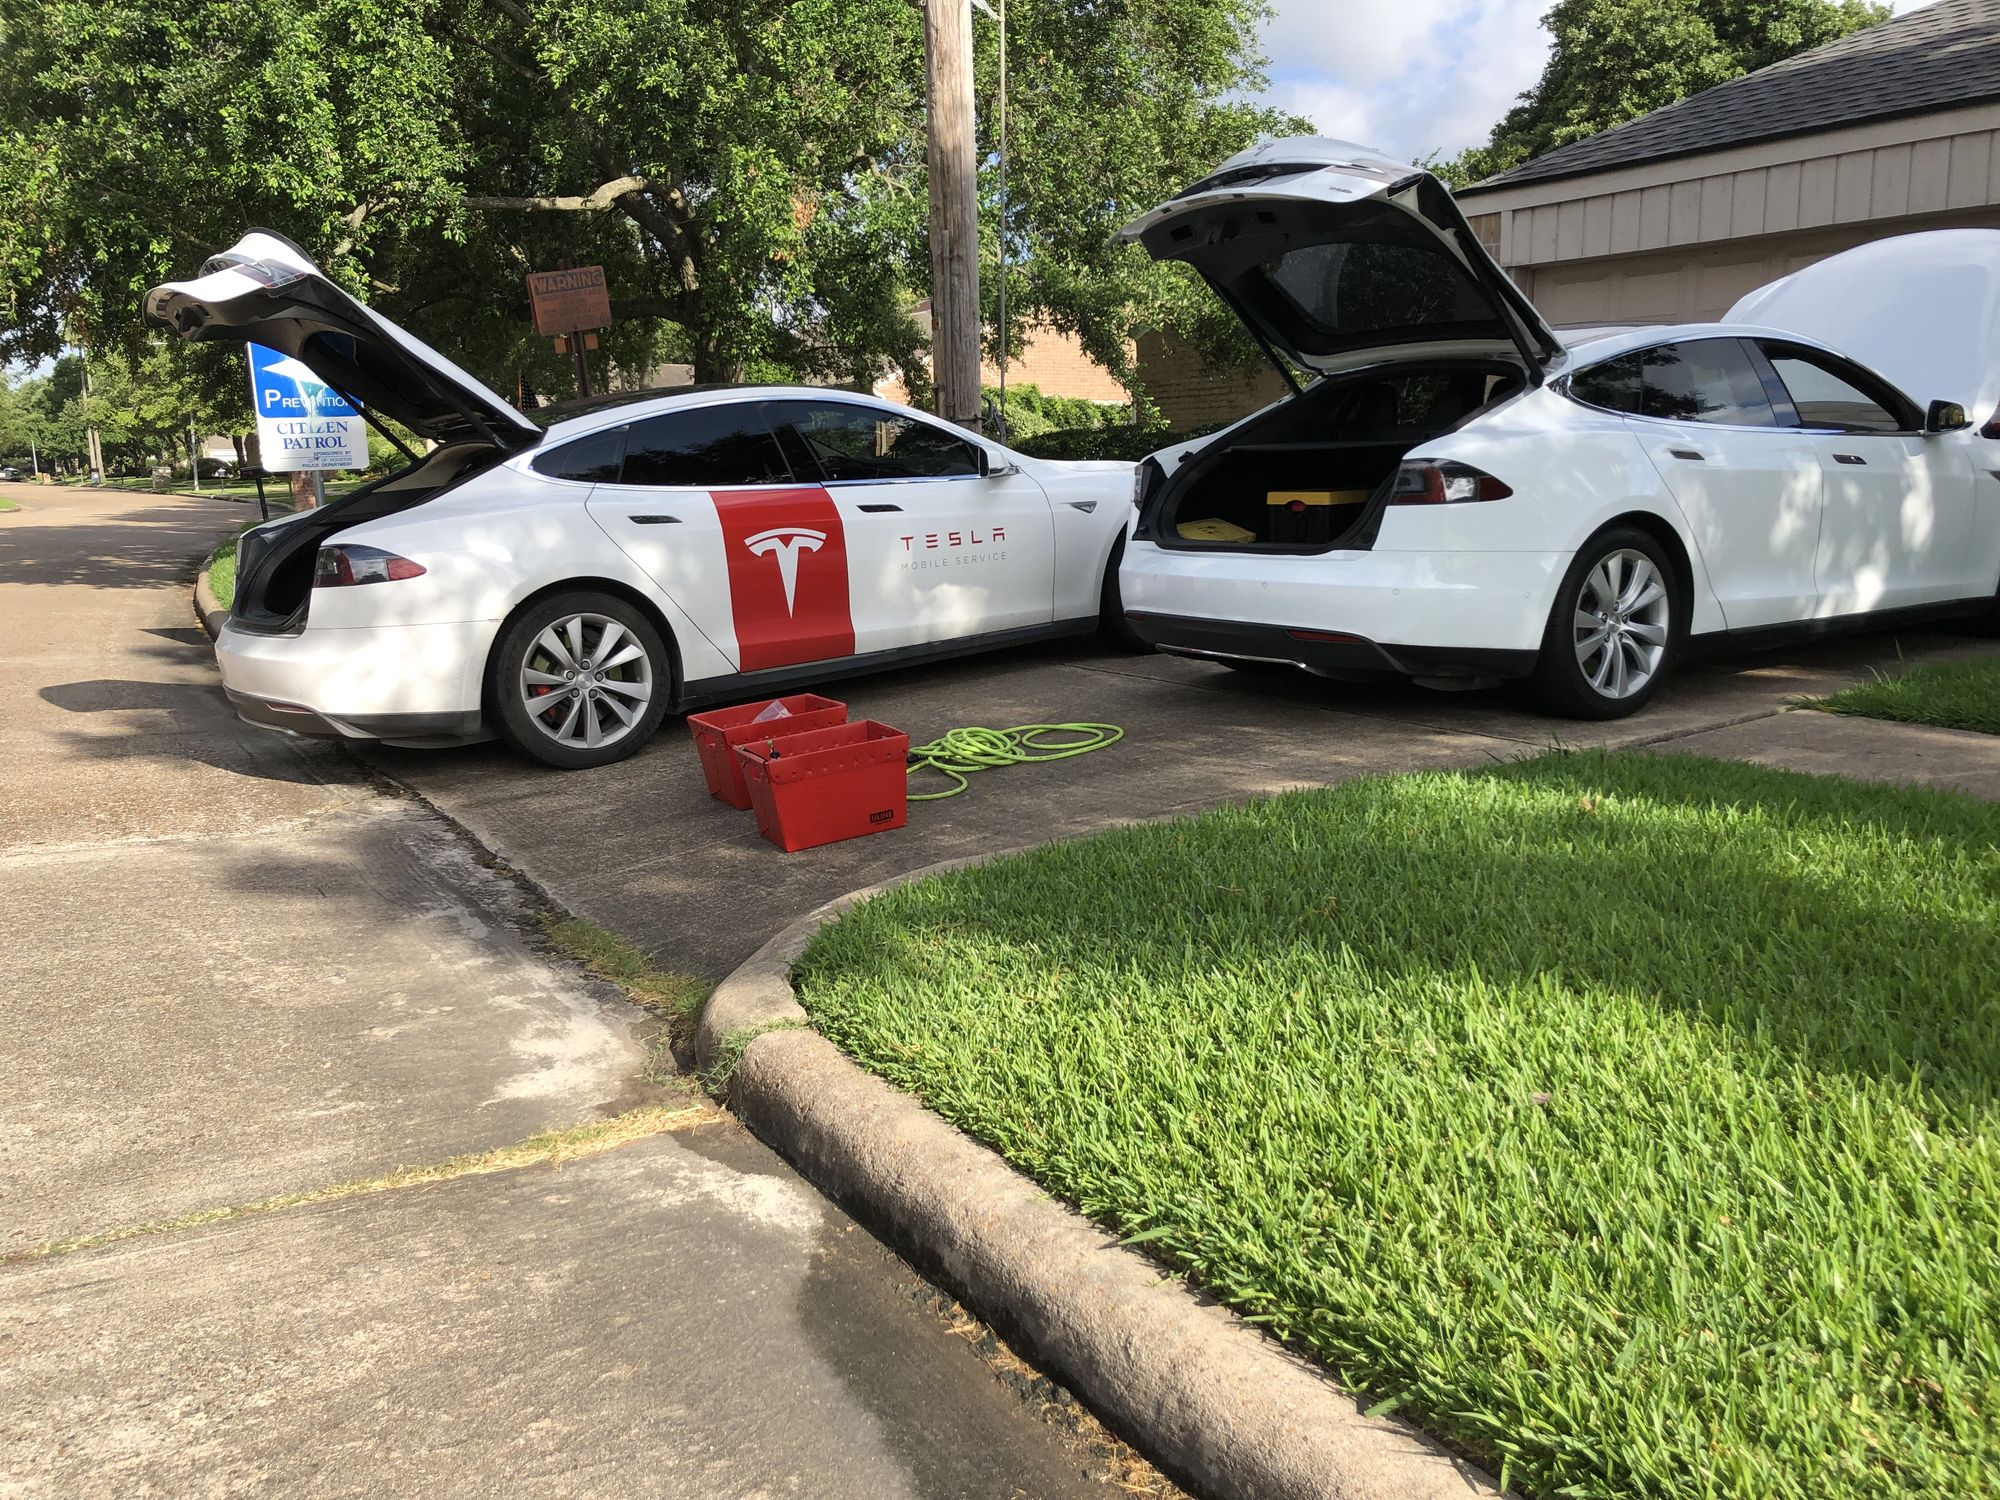 Unhappy Customers and Poor Customer Service at Tesla: Tips for Buyers Before Making a Decision